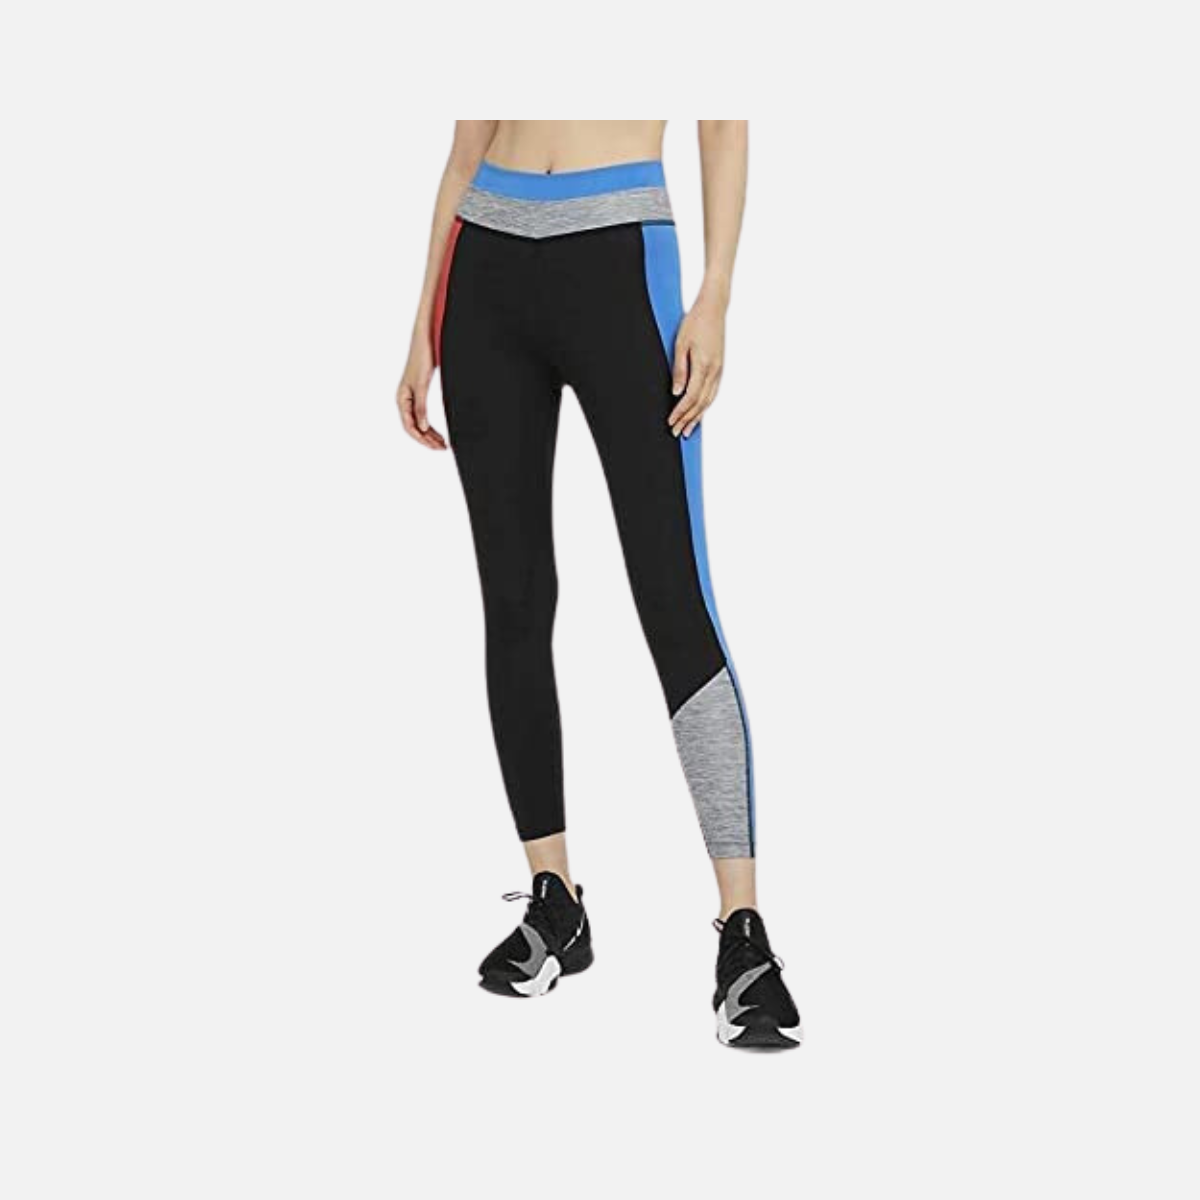 NIKE Fitness One CLRBK 7/8 Women's Tights -Multi Color